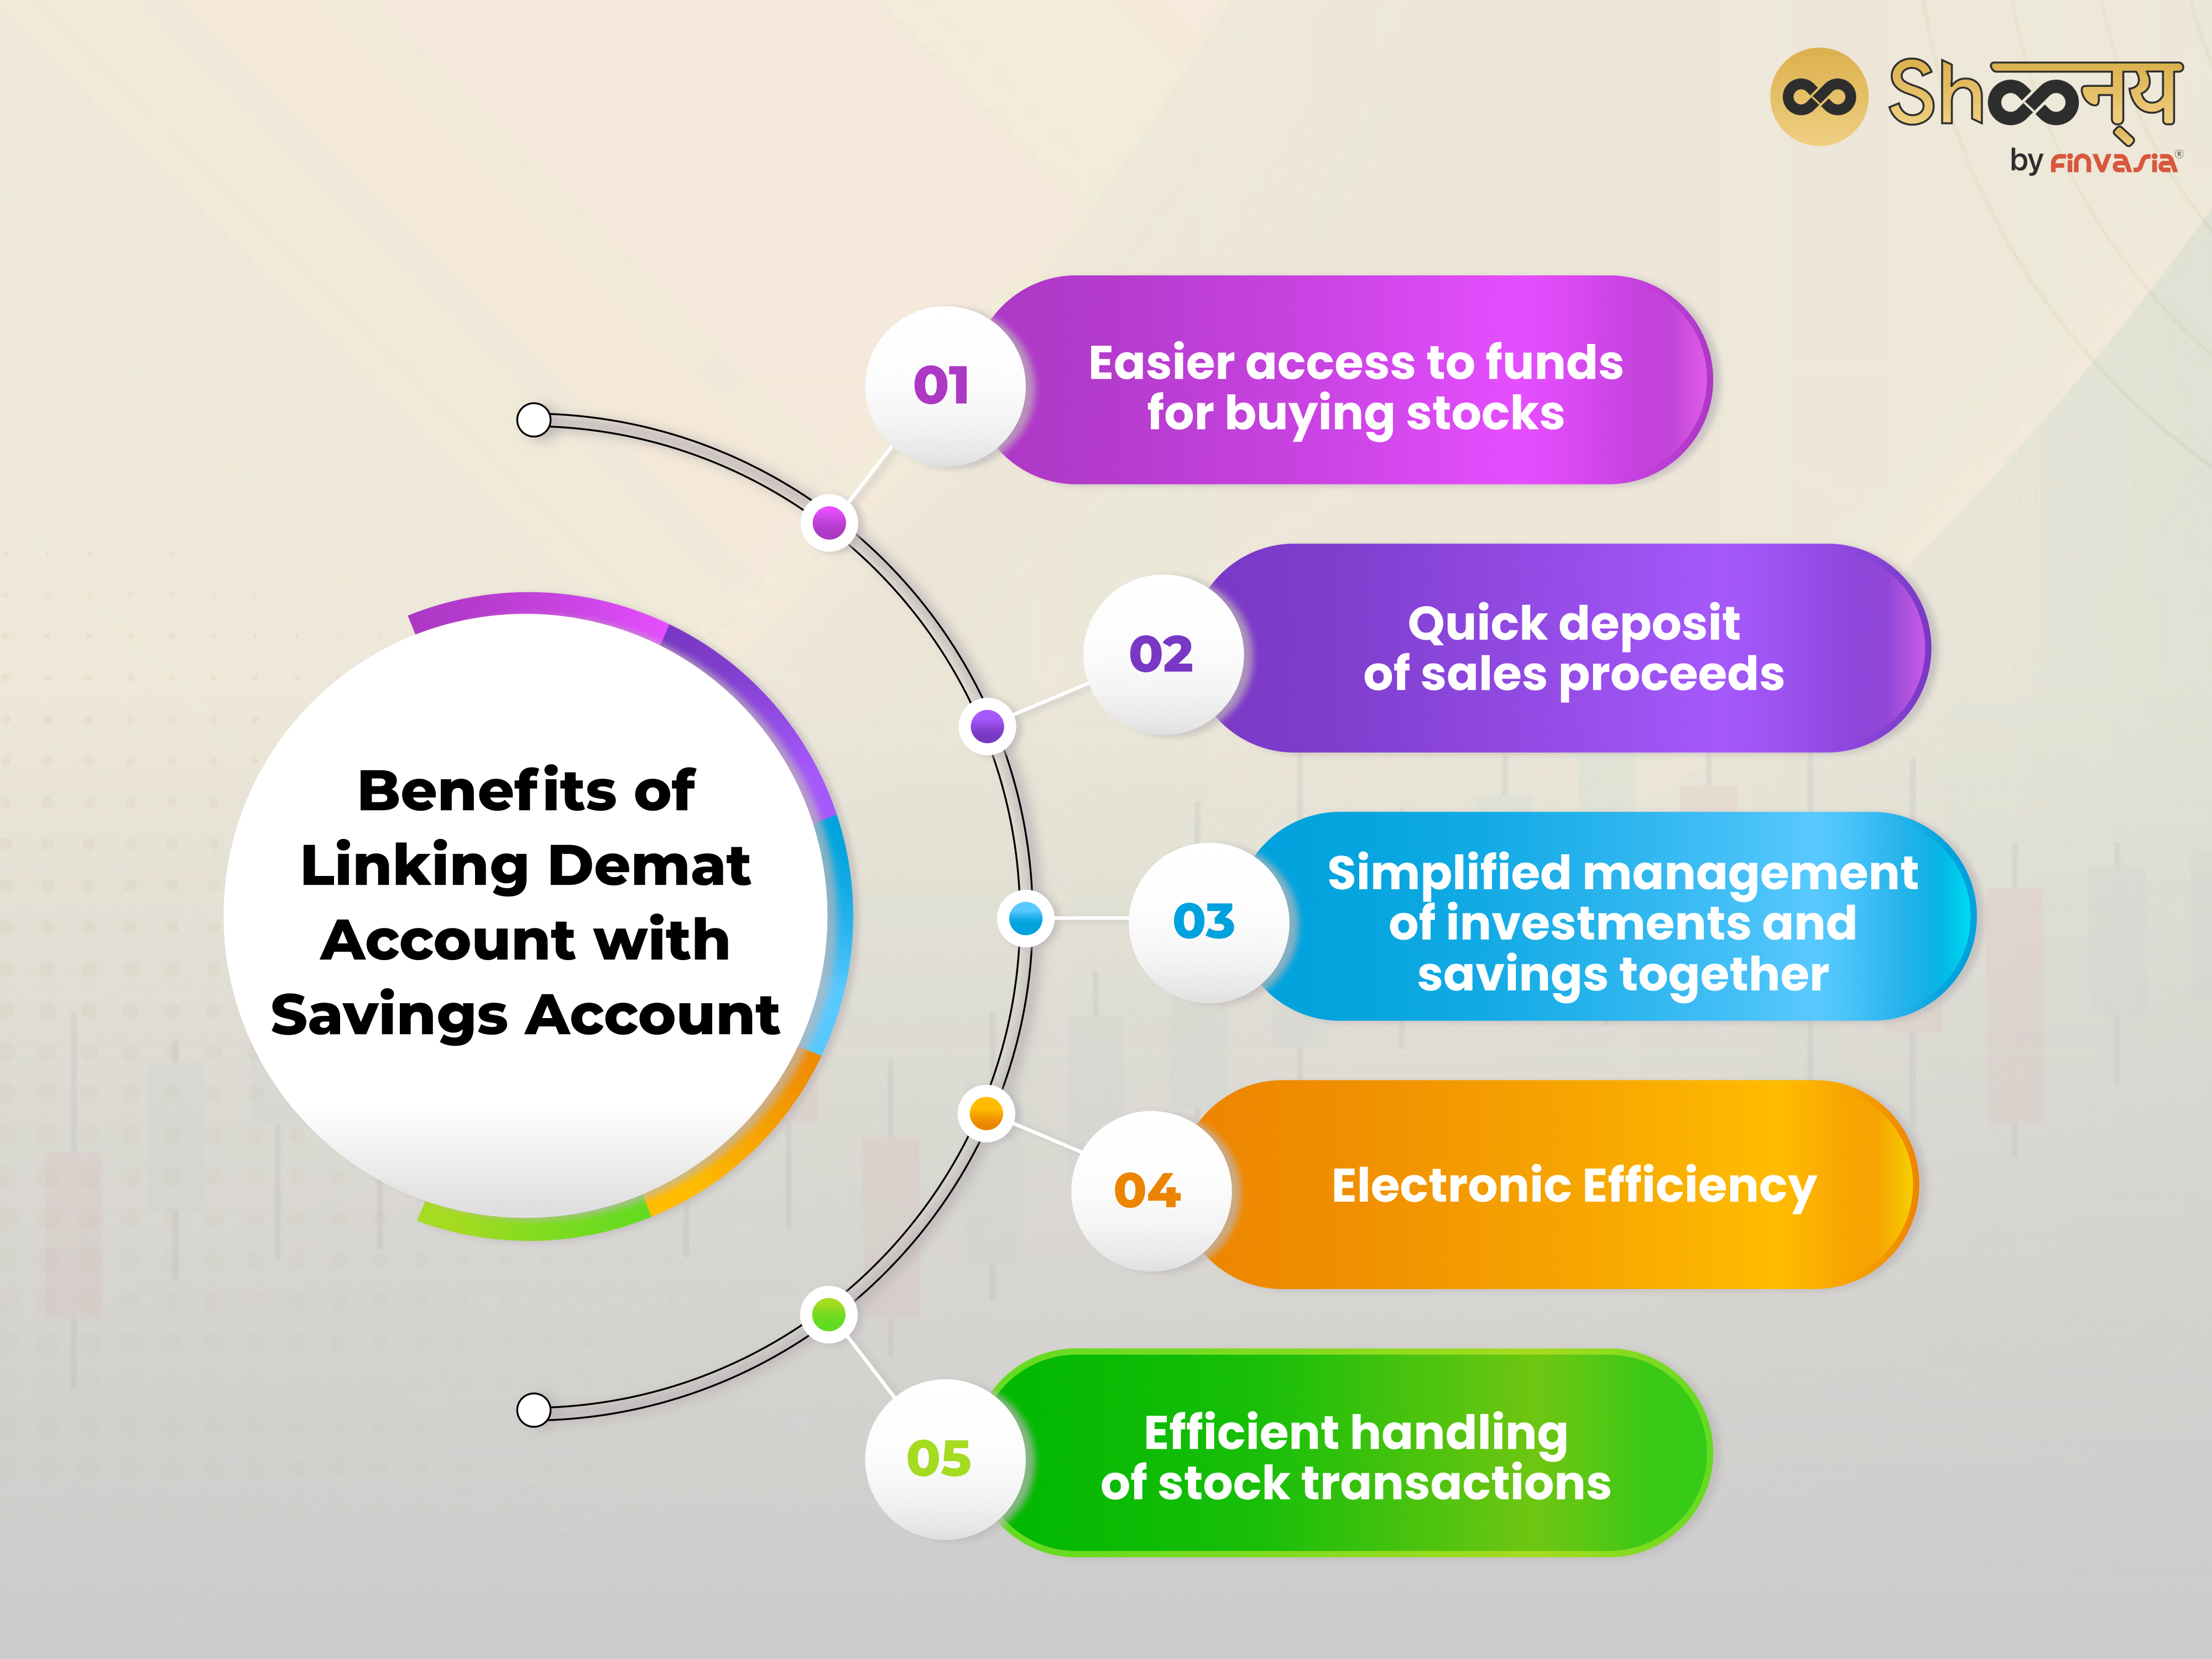 Benefits of Linking Demat Account with Savings Account
